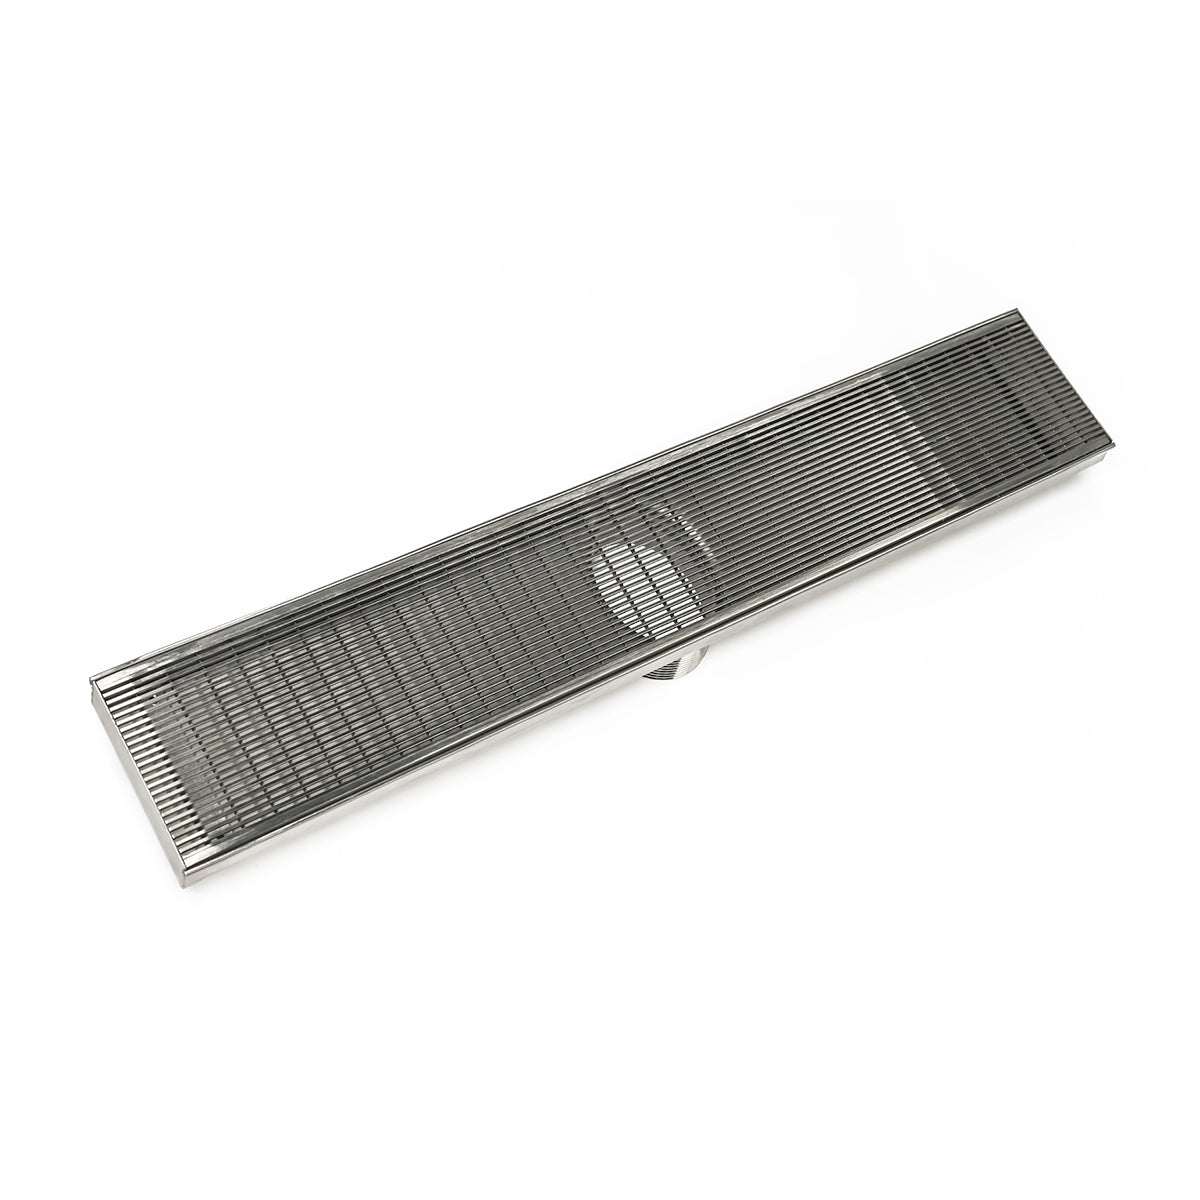 Infinity Drain 48" FX Series High Flow Fixed Length Linear Drain Kit with Wedge Wire Grate with PVC Drain Body